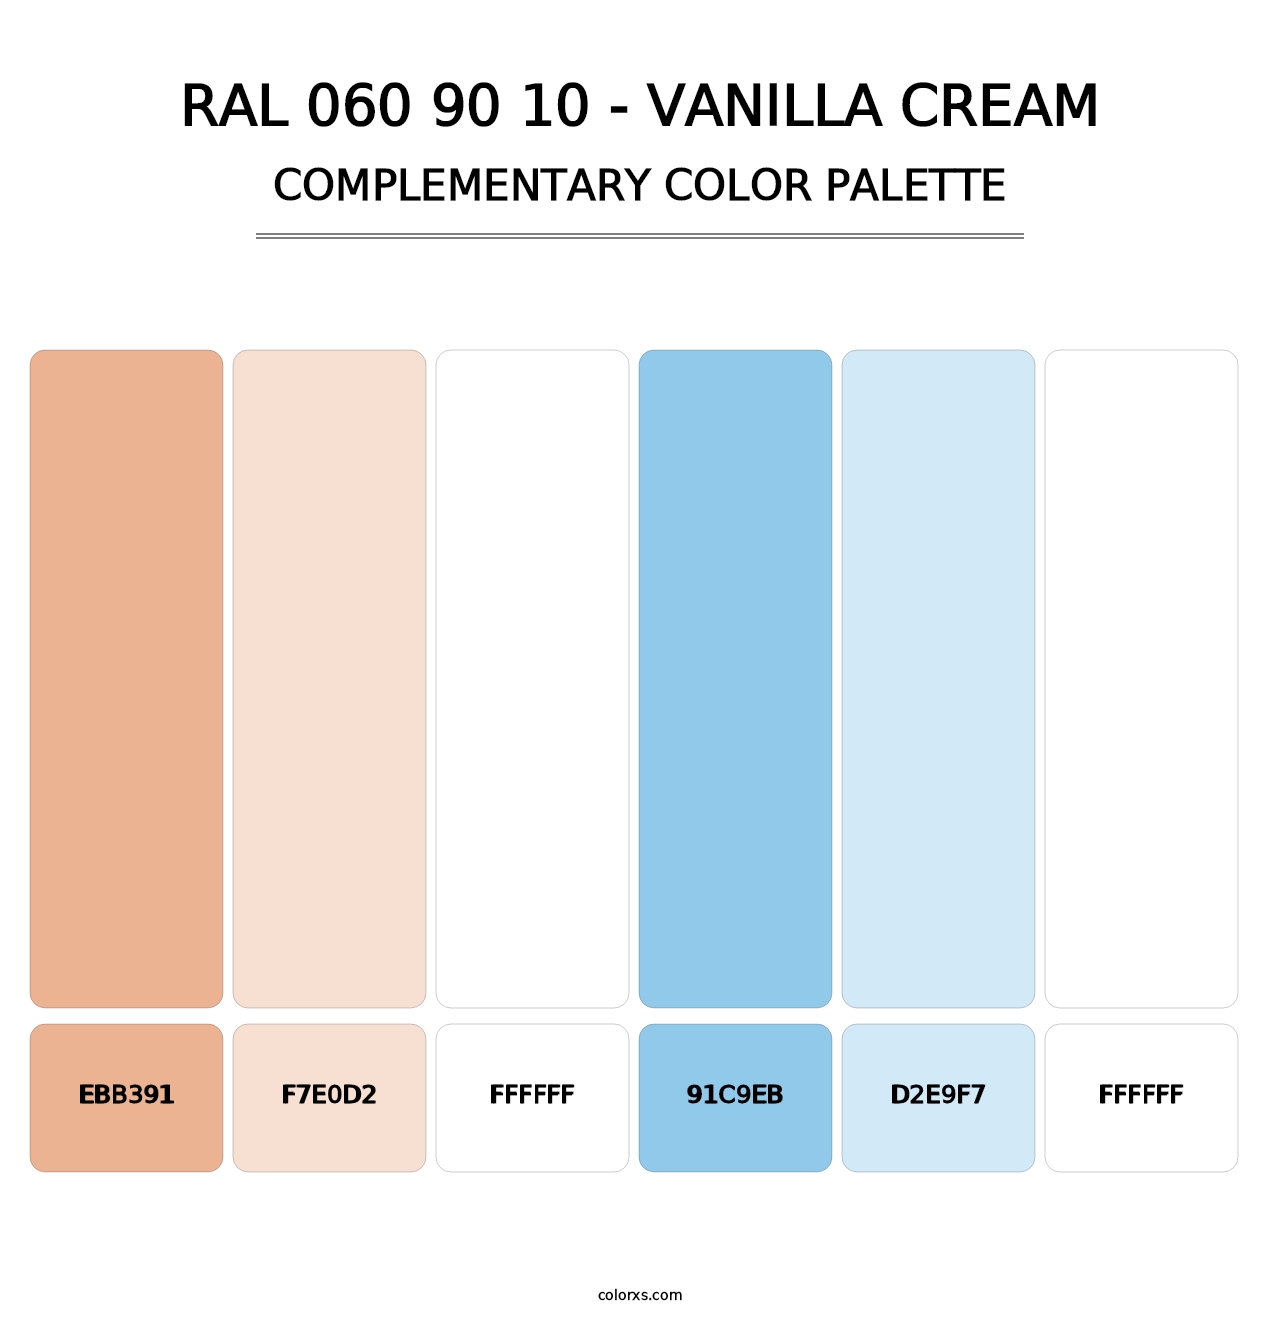 RAL 060 90 10 - Vanilla Cream - Complementary Color Palette